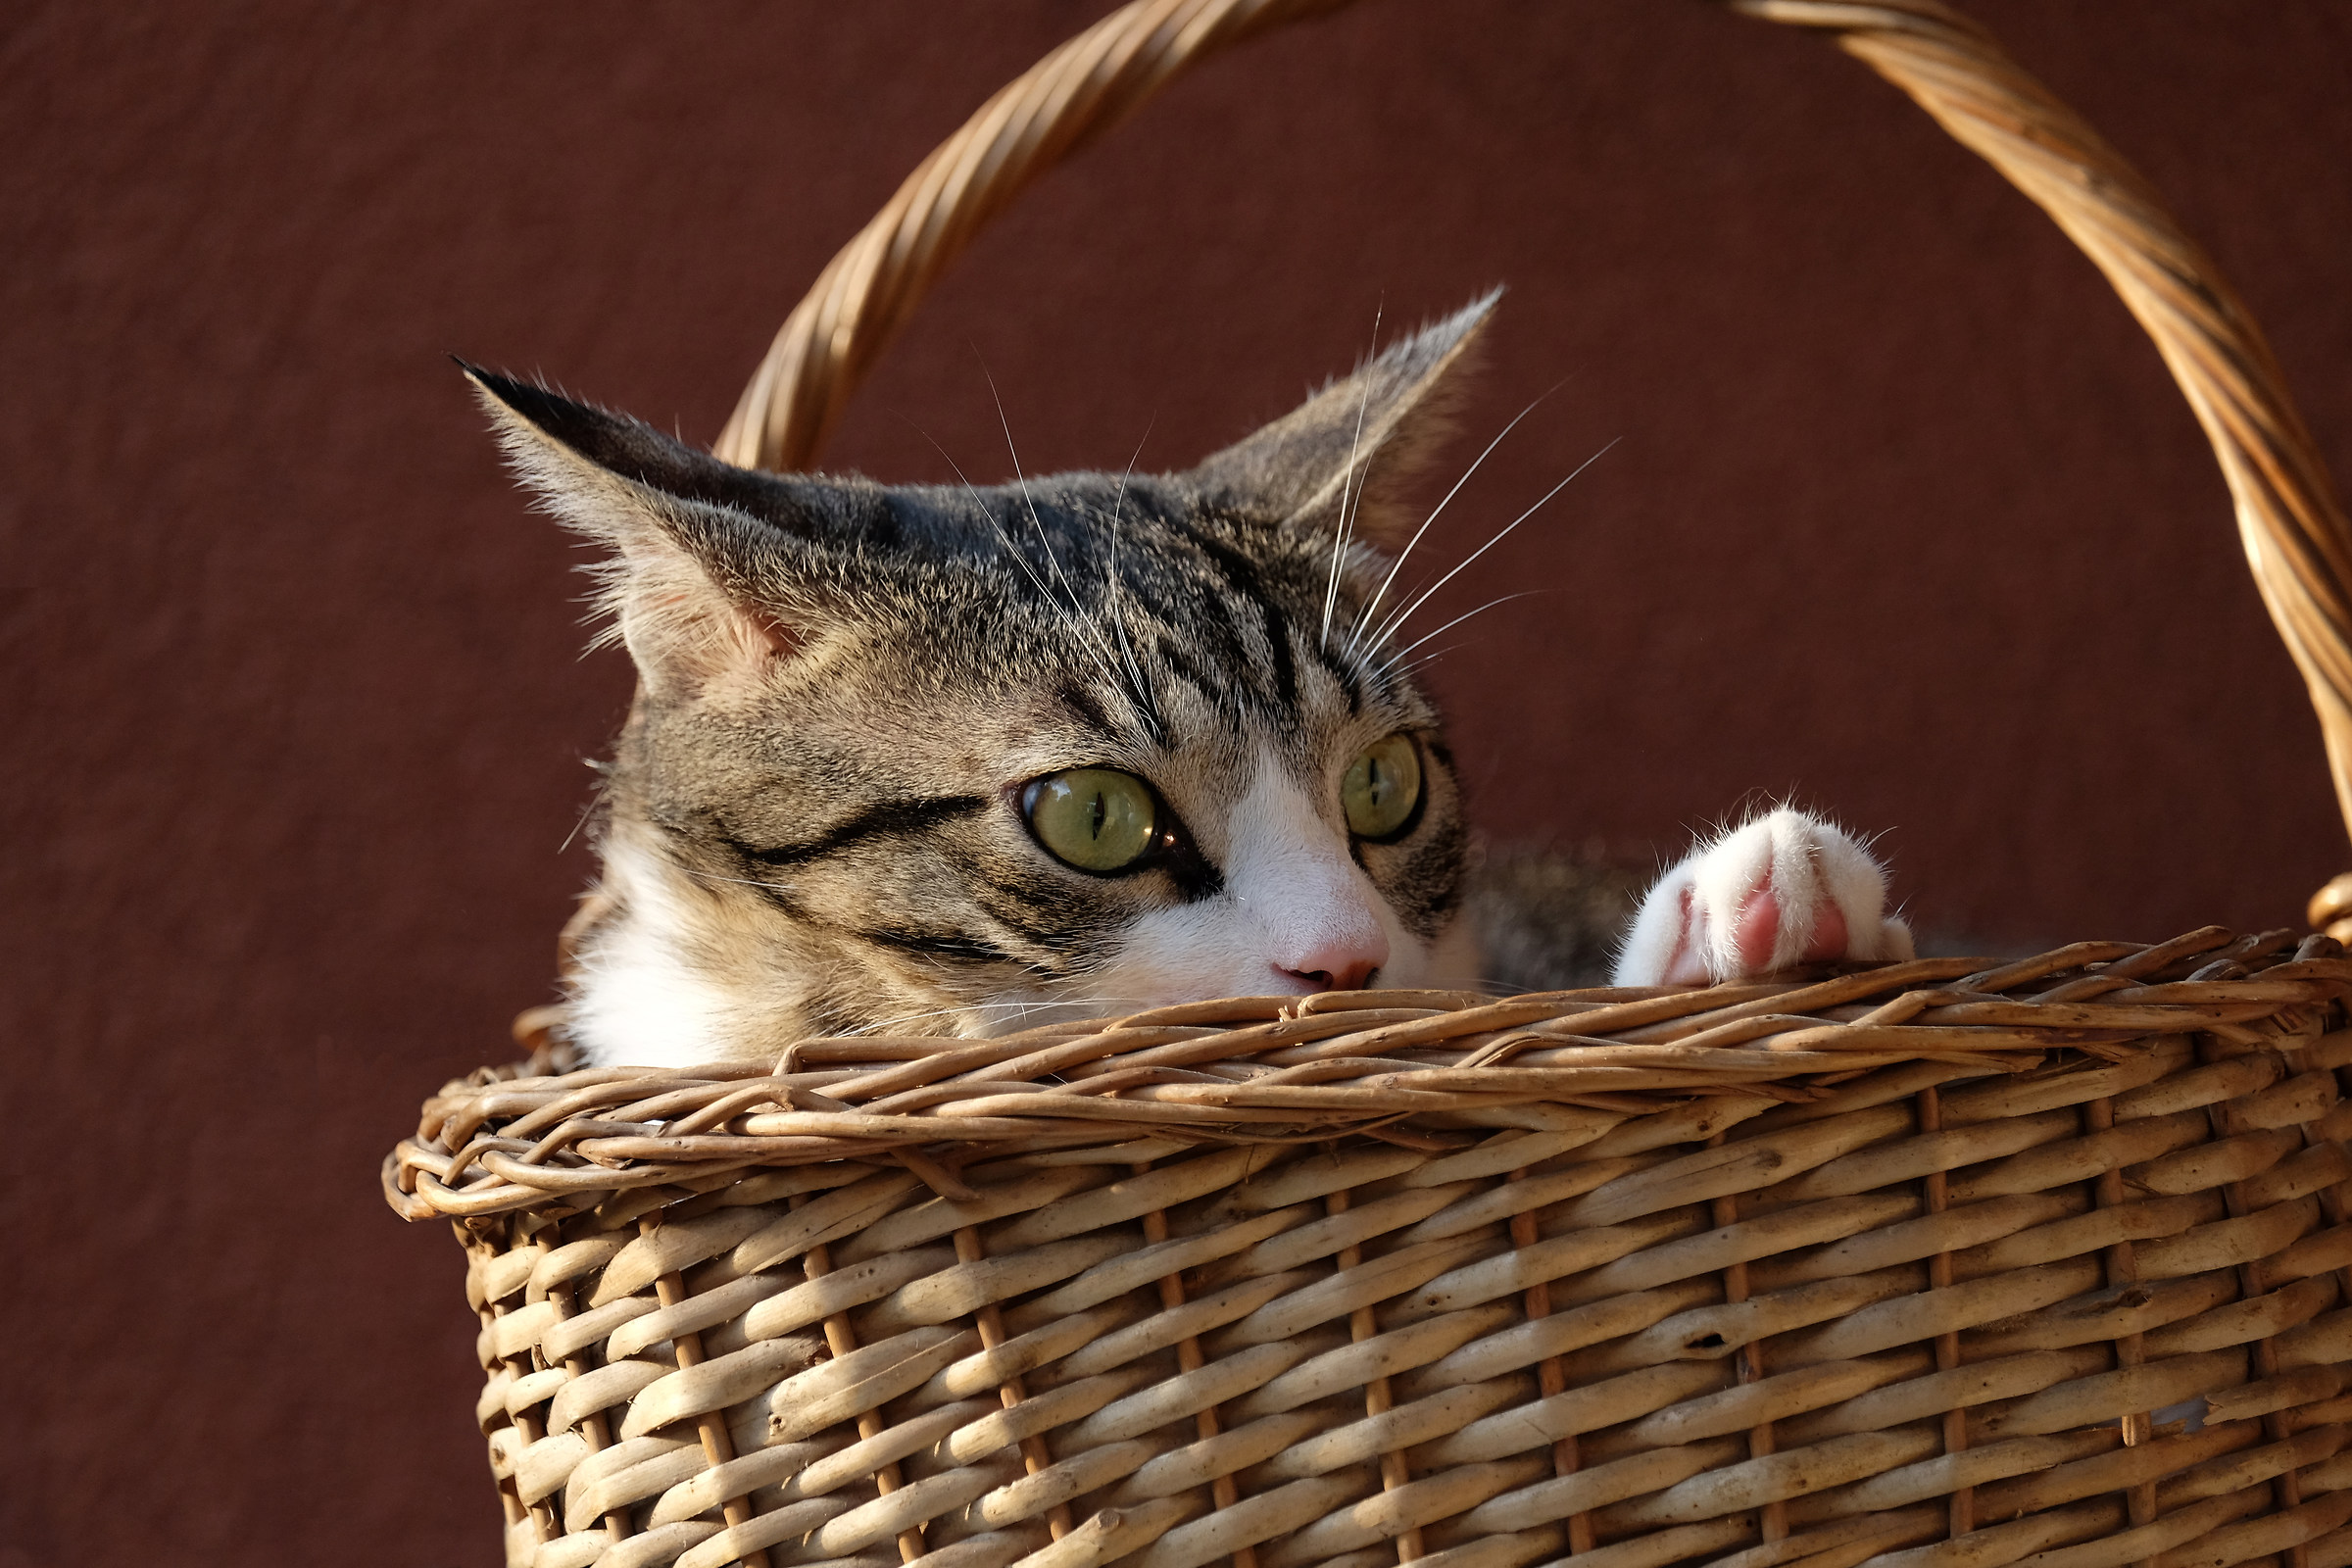 Cat in the basket...